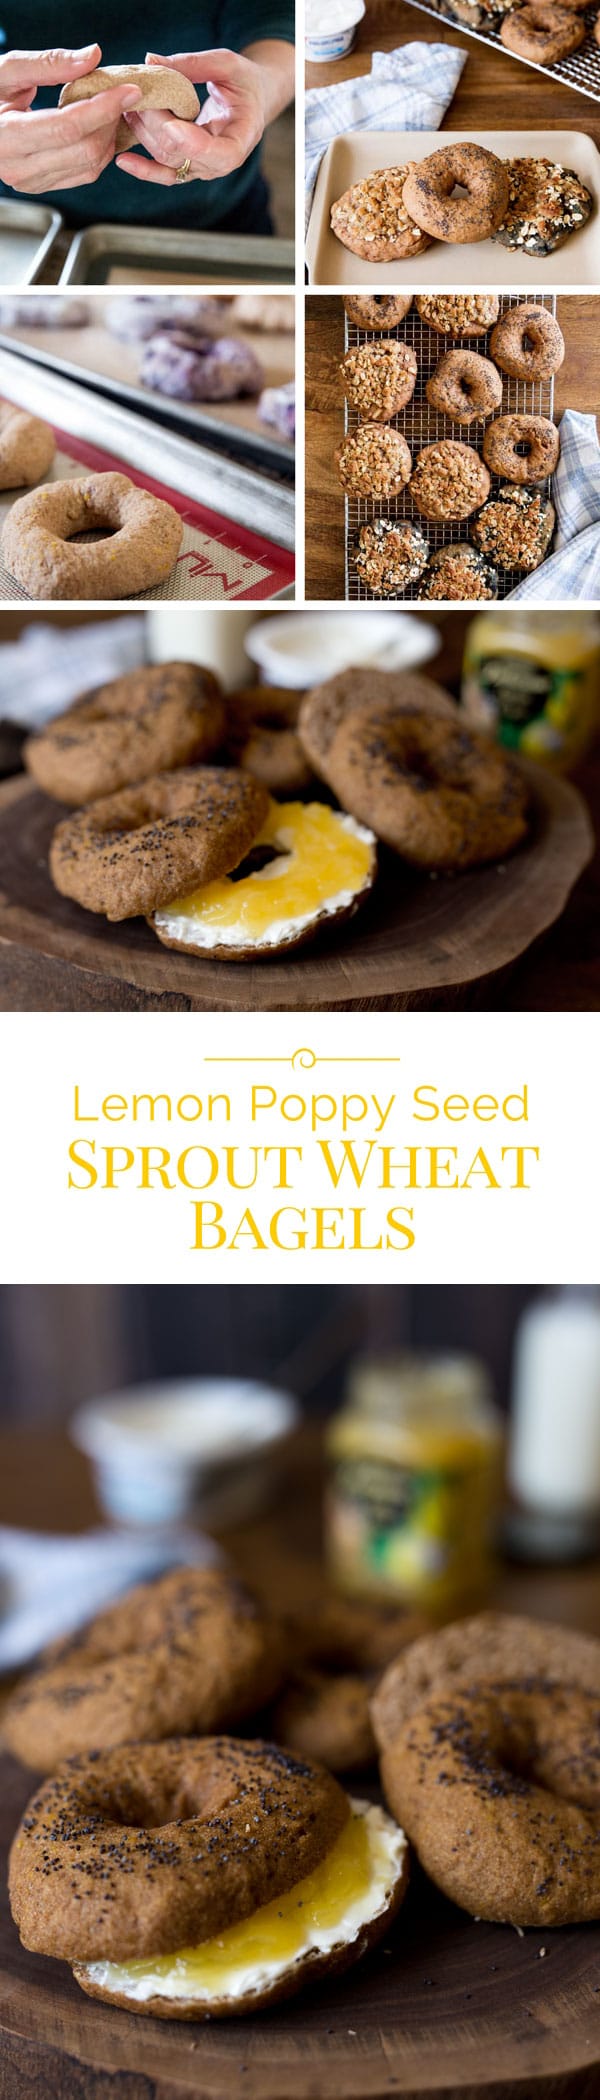 Sprouted-Whole-Wheat-Bagel-Collage-2-Barbara-Bakes